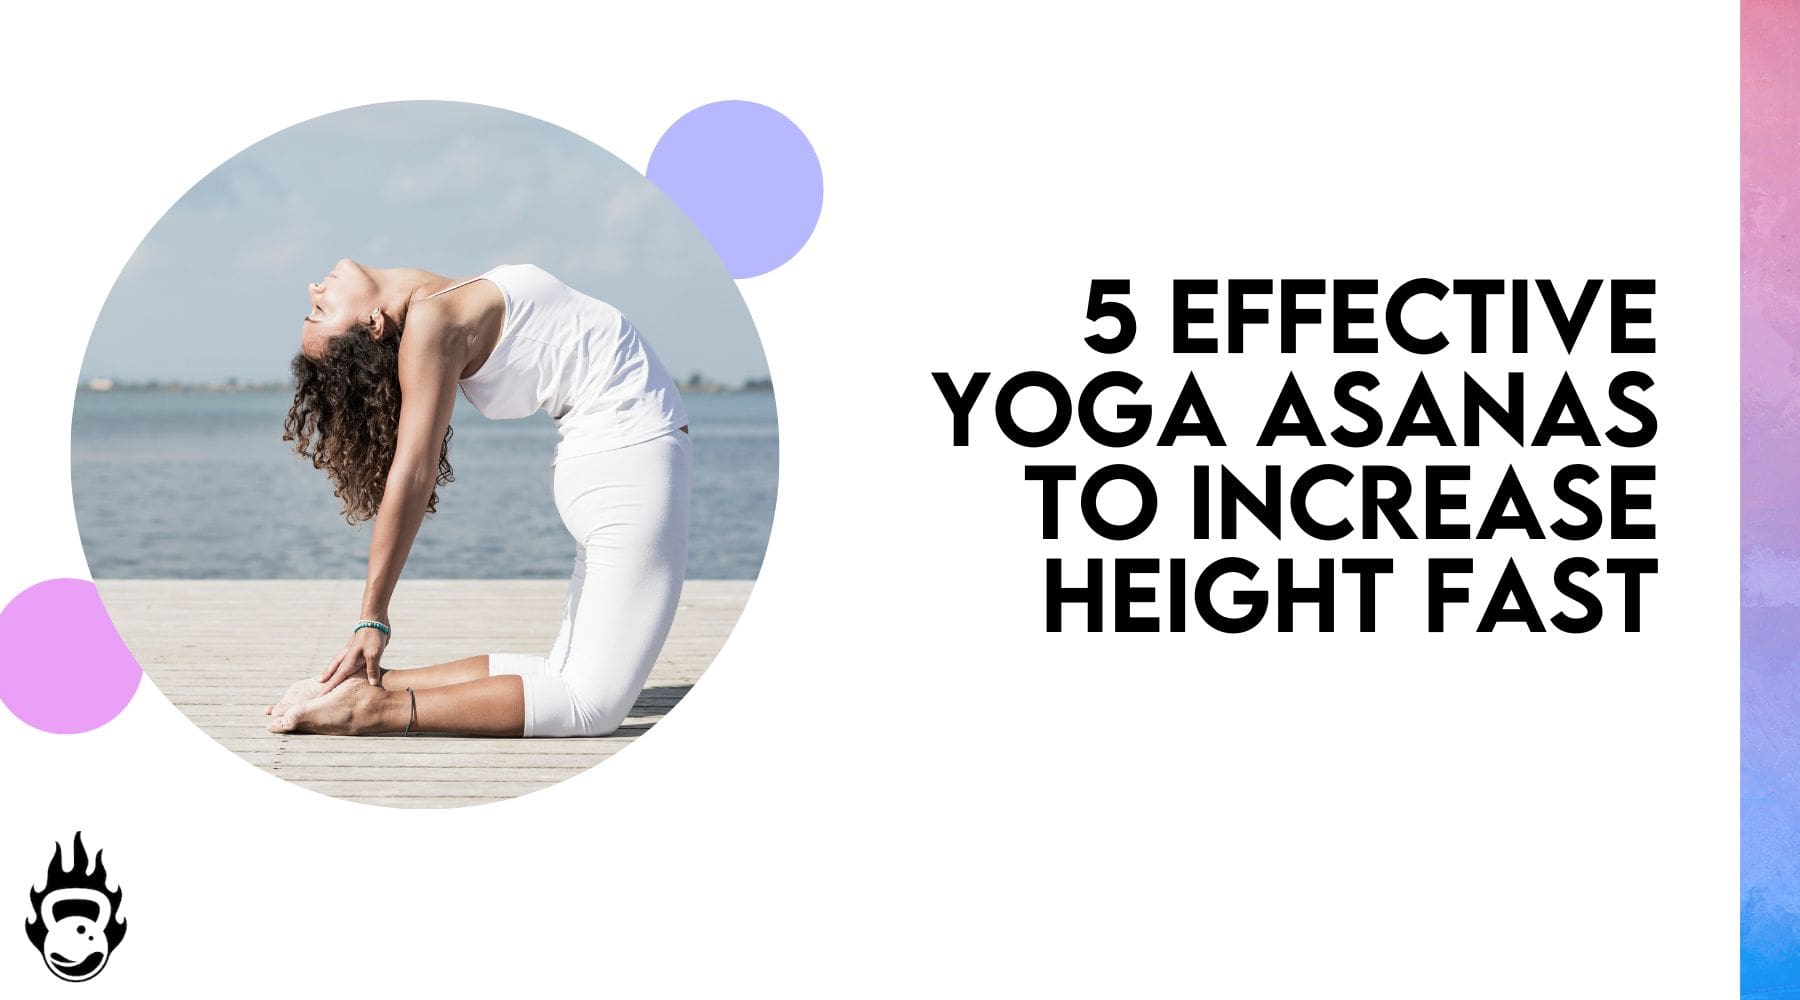 10 Best Standing Yoga Poses To Increase Strength - YOGA PRACTICE